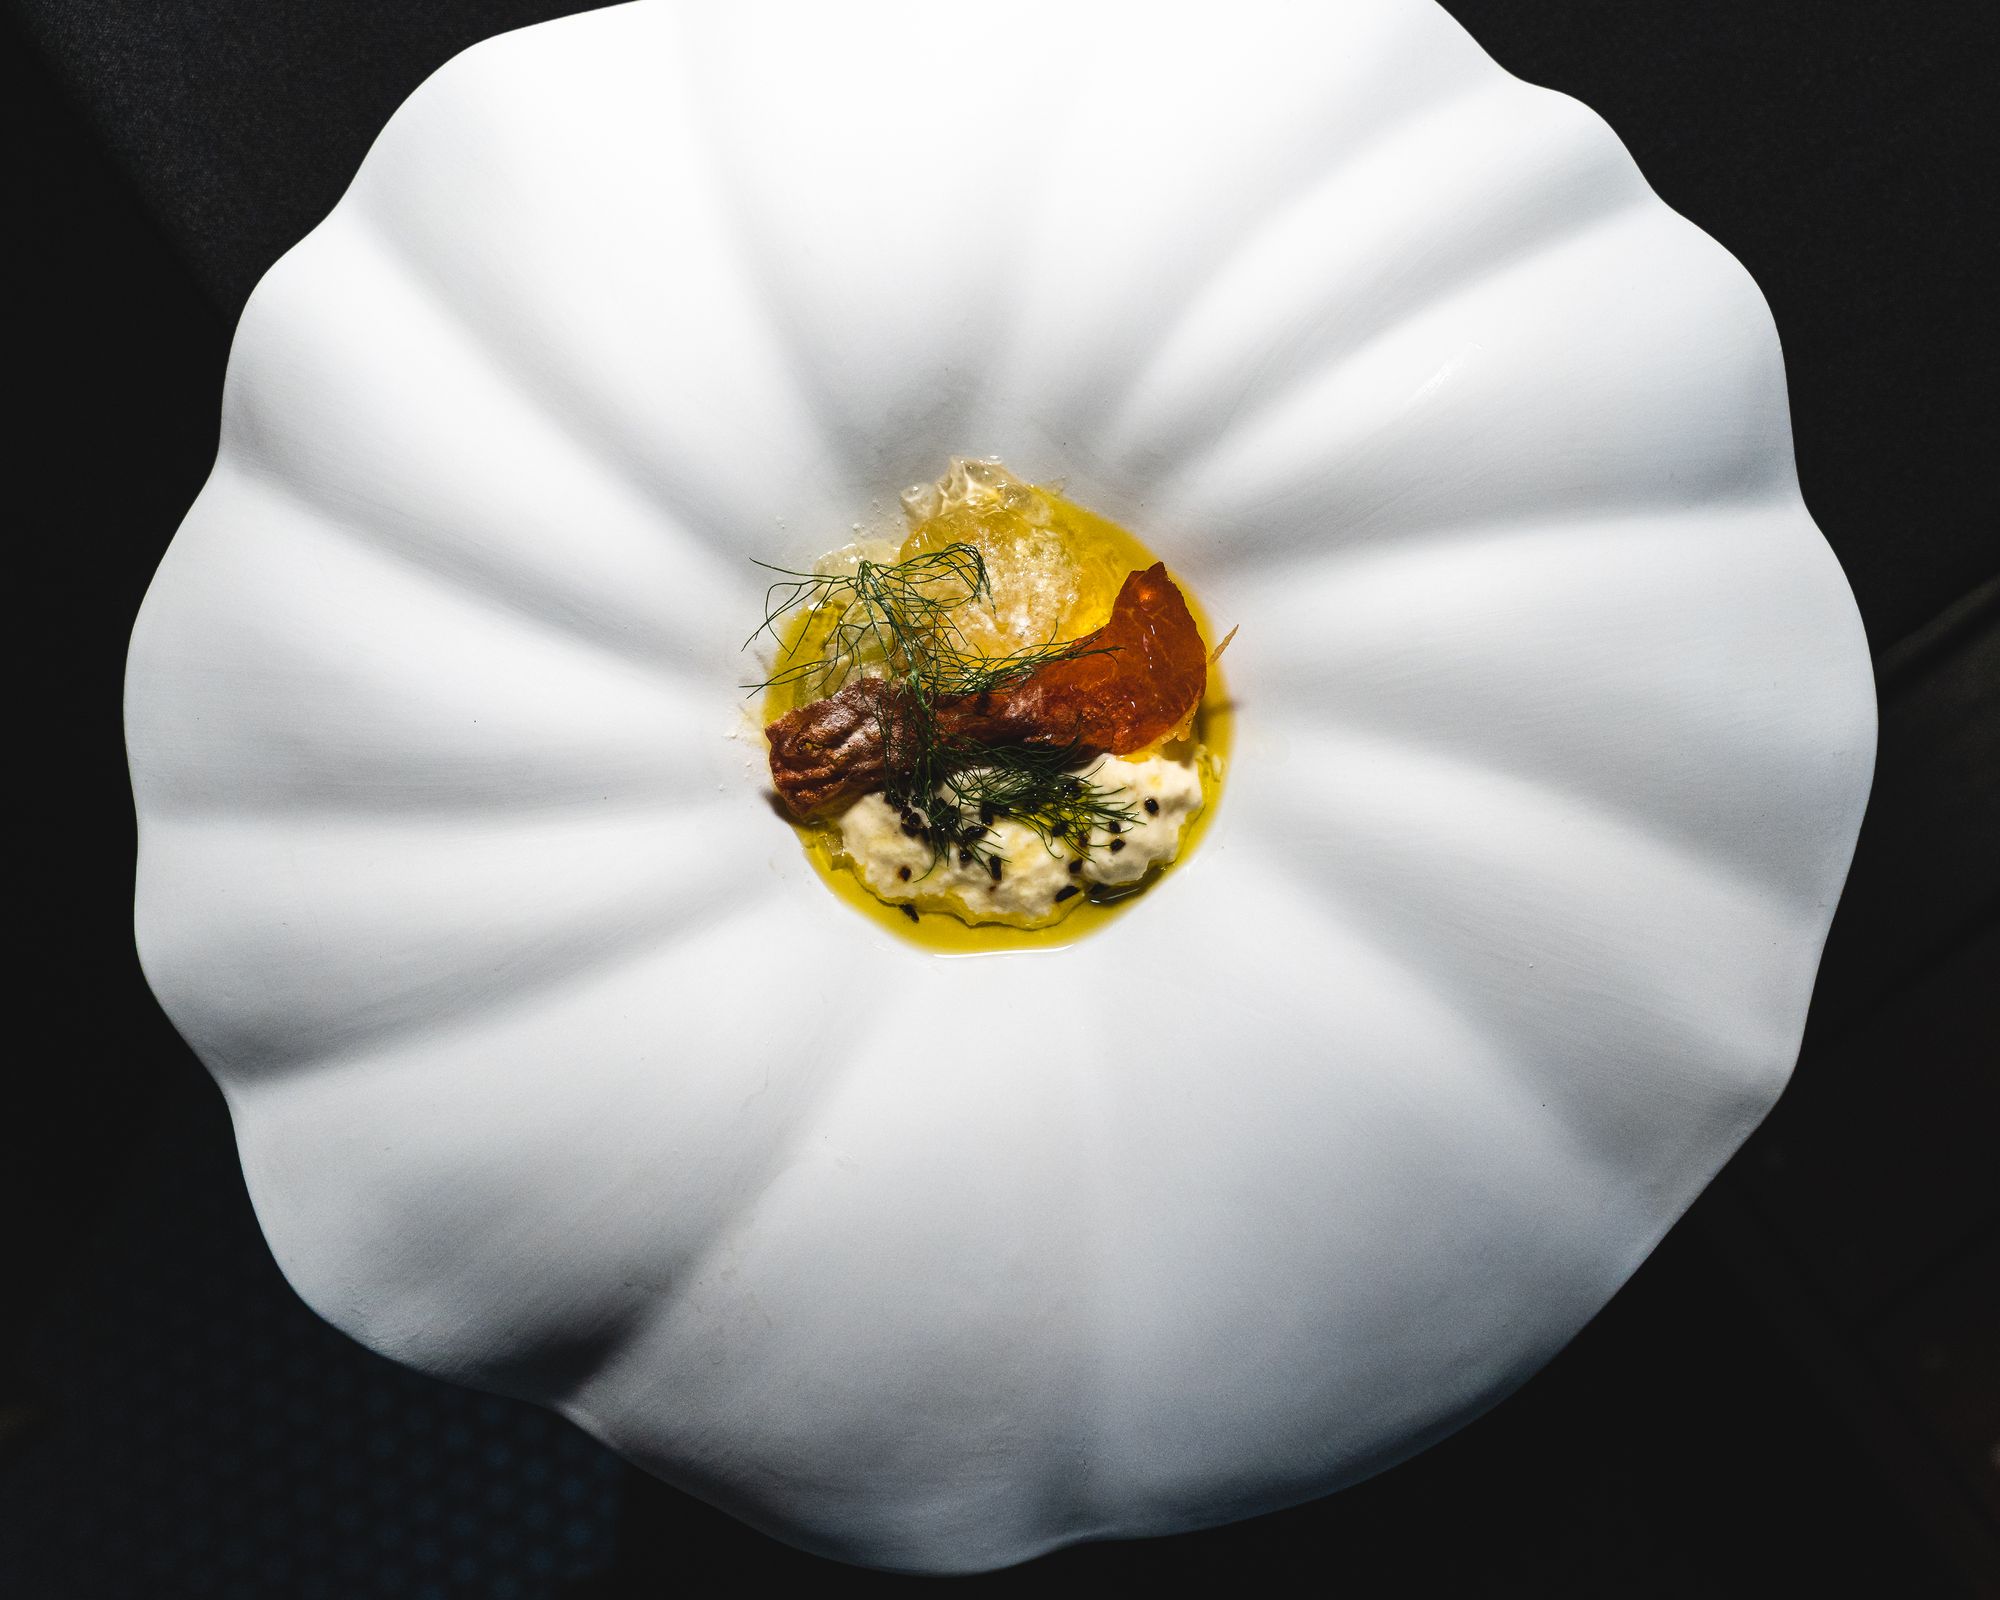 Flower shaped plate with fine dining dish in the middle